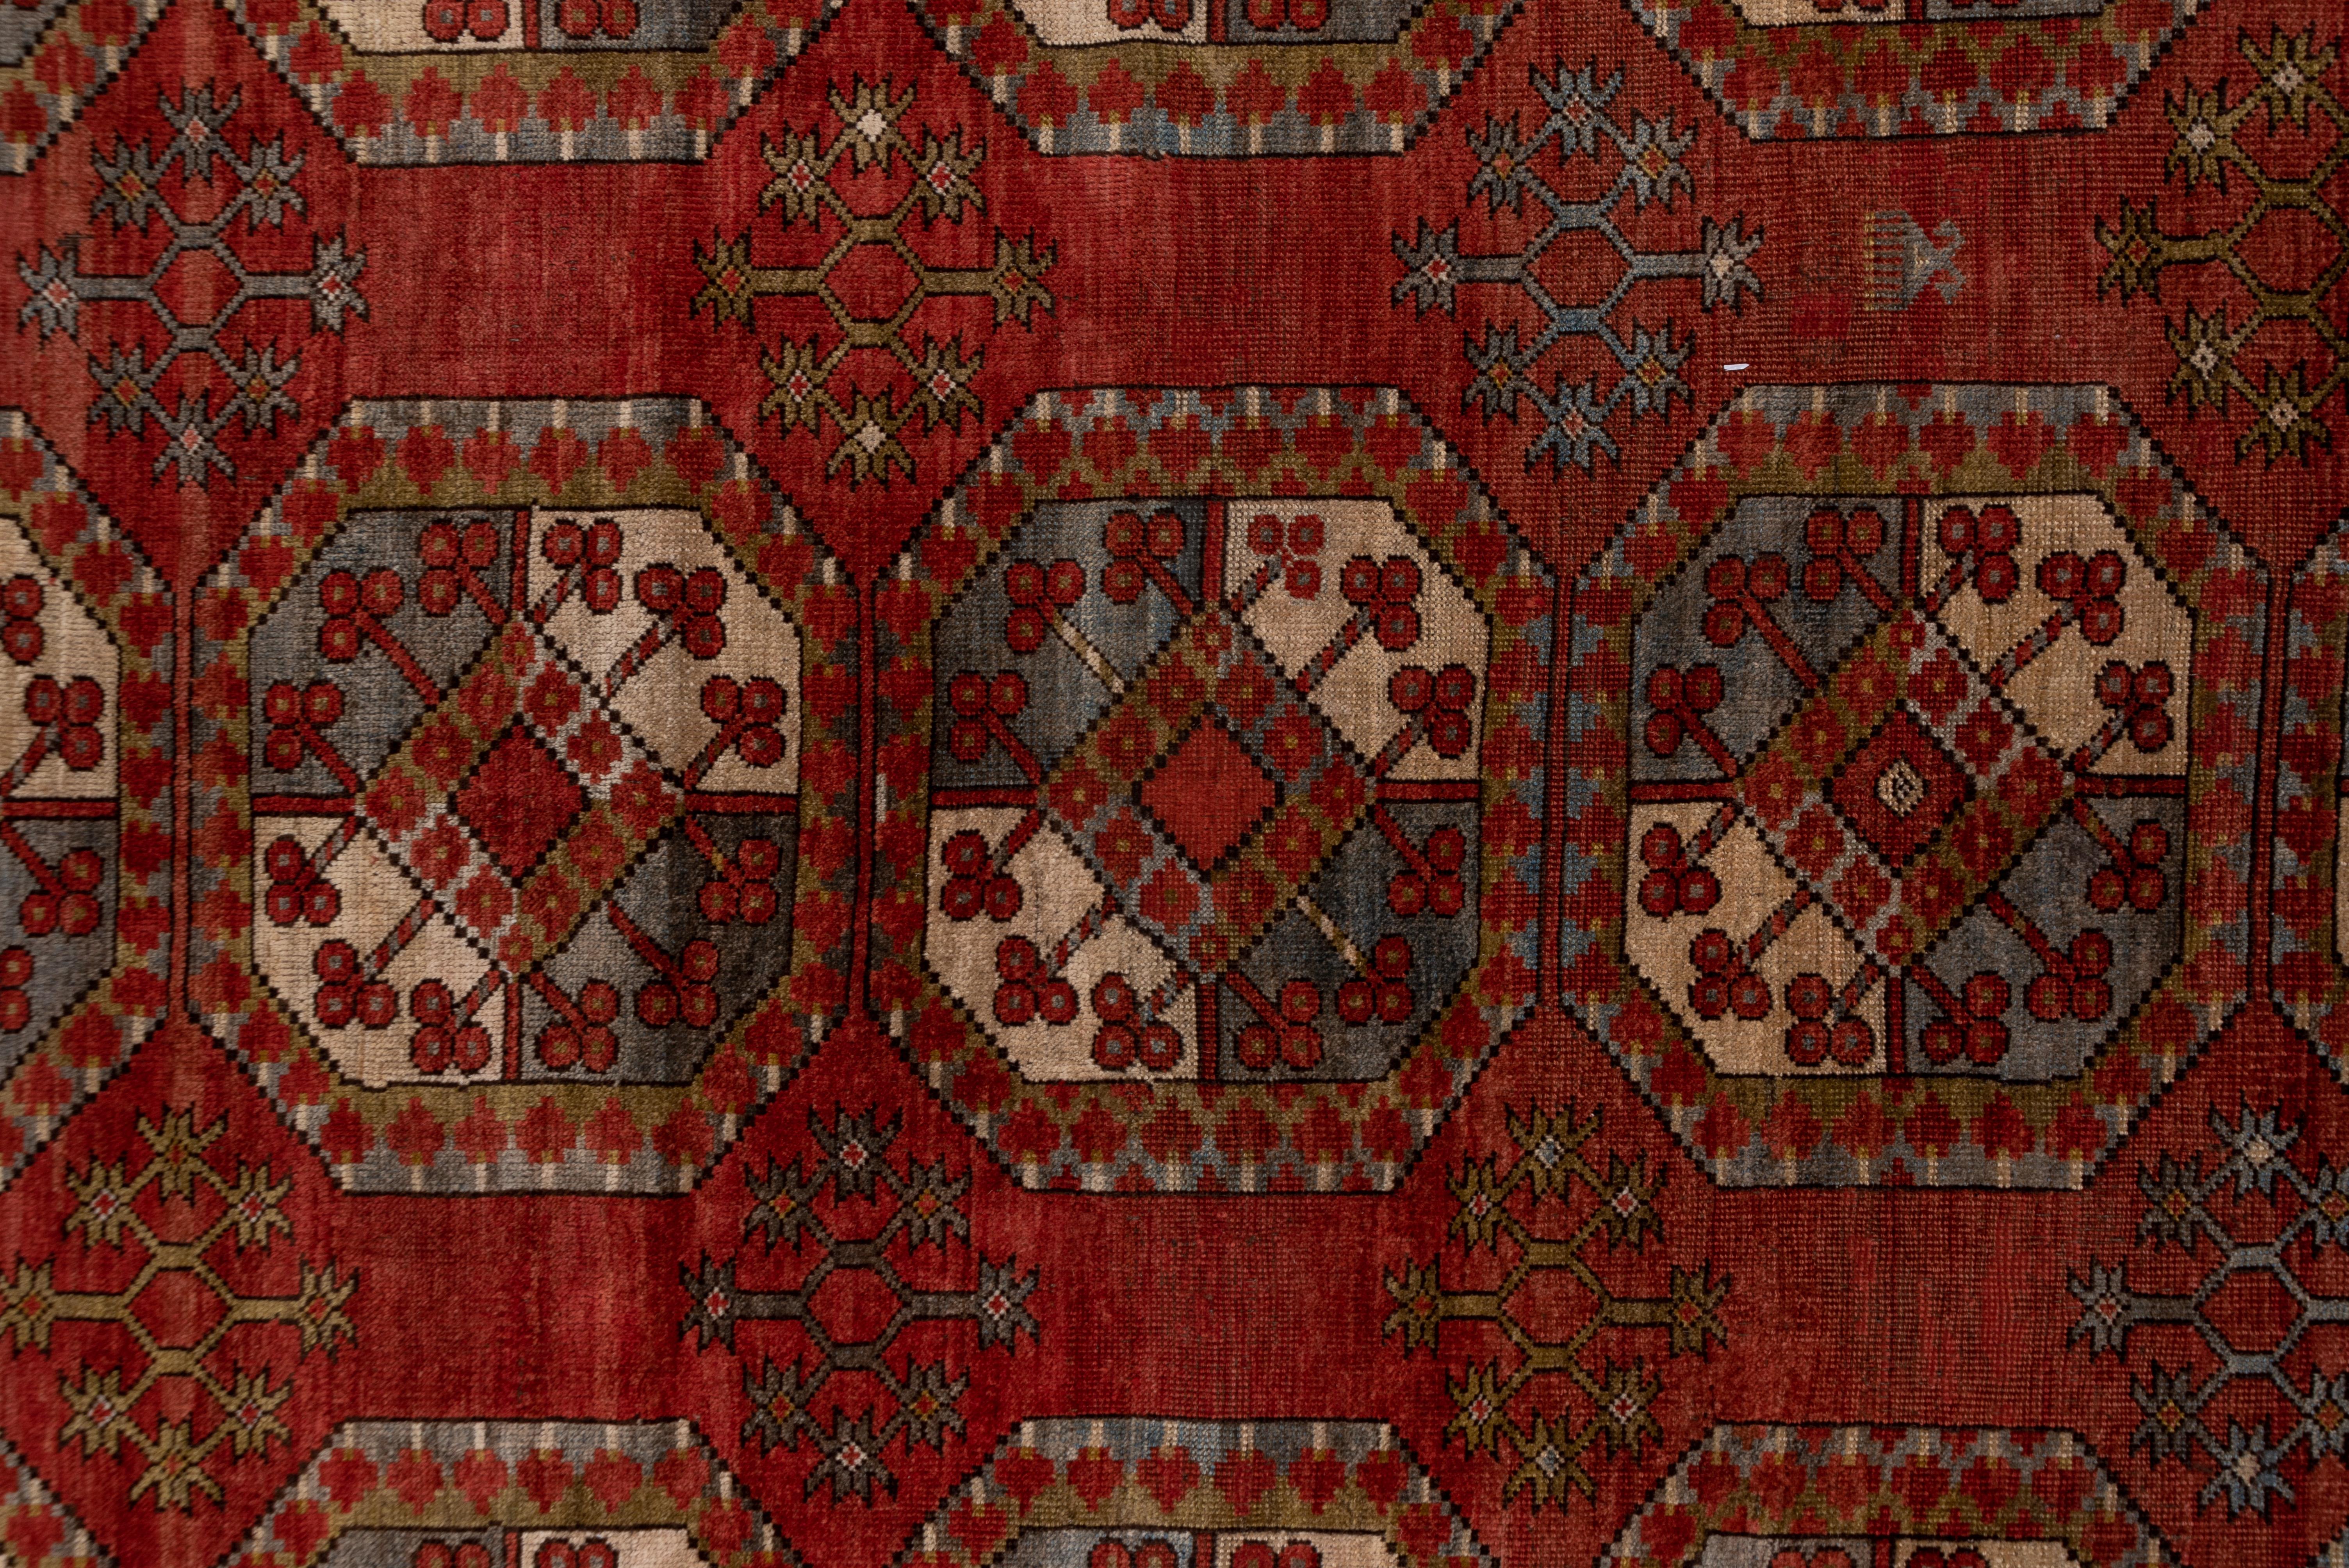 Hand-Knotted Antique Afghan Ersari Carpet, Red Field, Allover Field